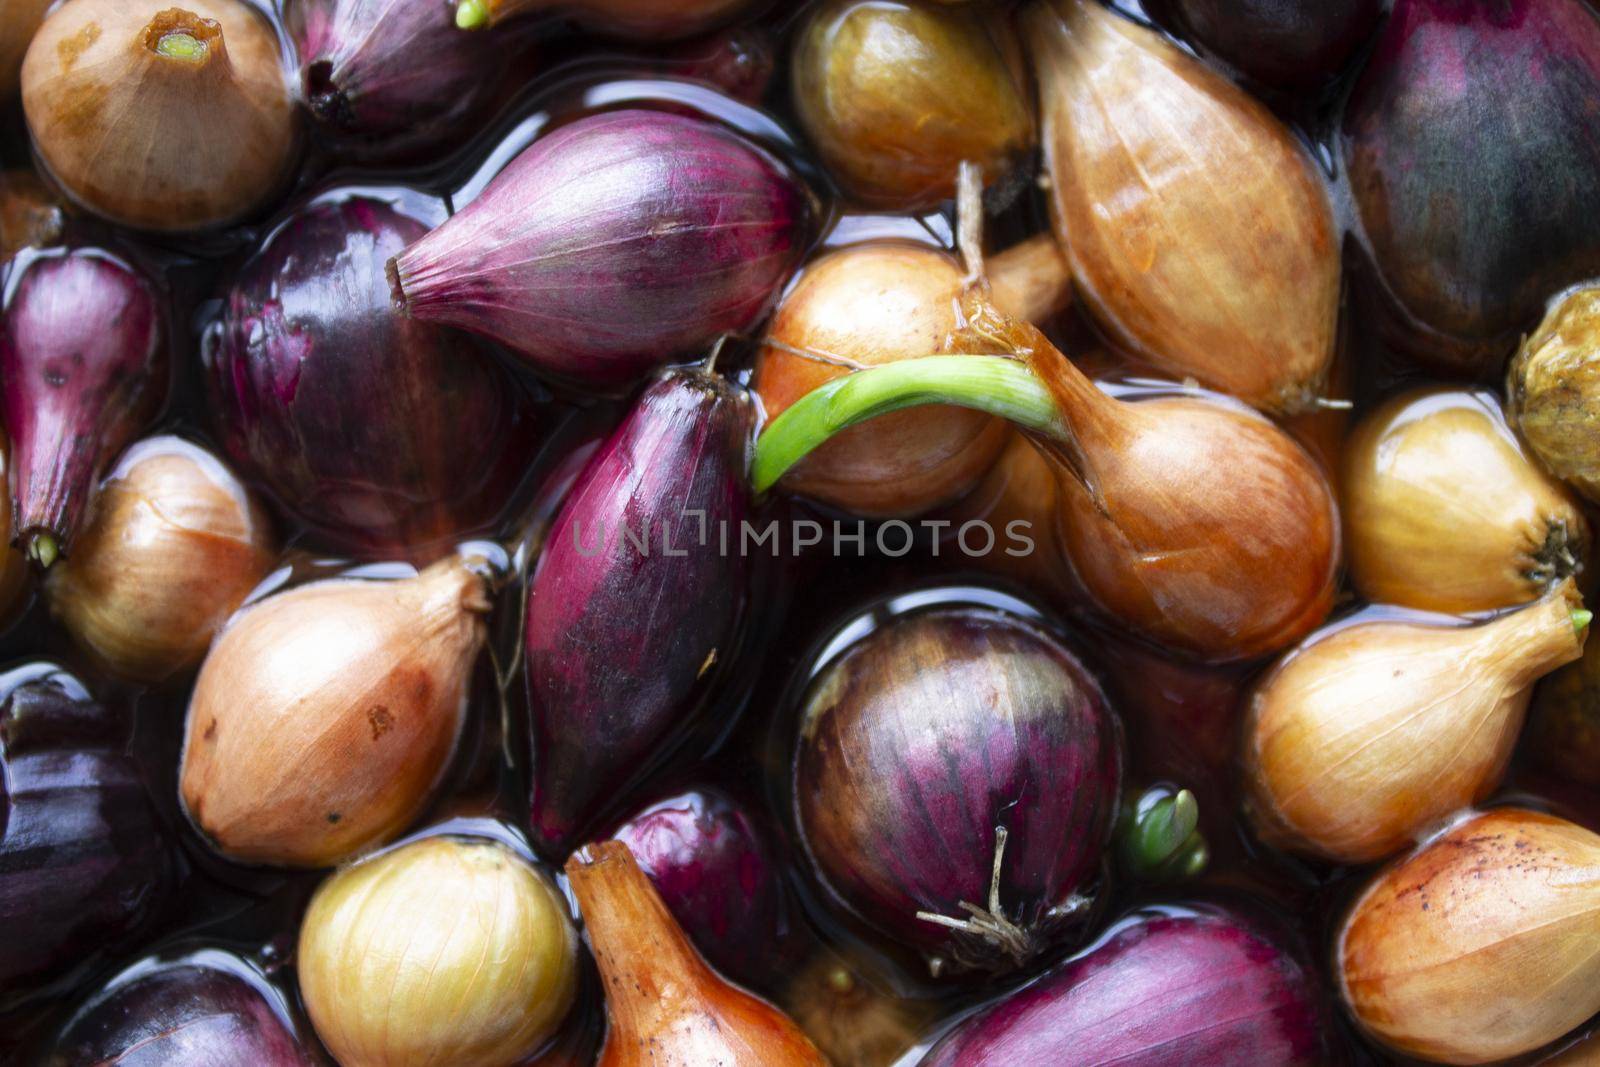 Yellow and purple onions, seedlings, Background of growing onions. There are many growing onion plantations. Rural herbs and vegetables. Sale at the farmer's market. pattern texture